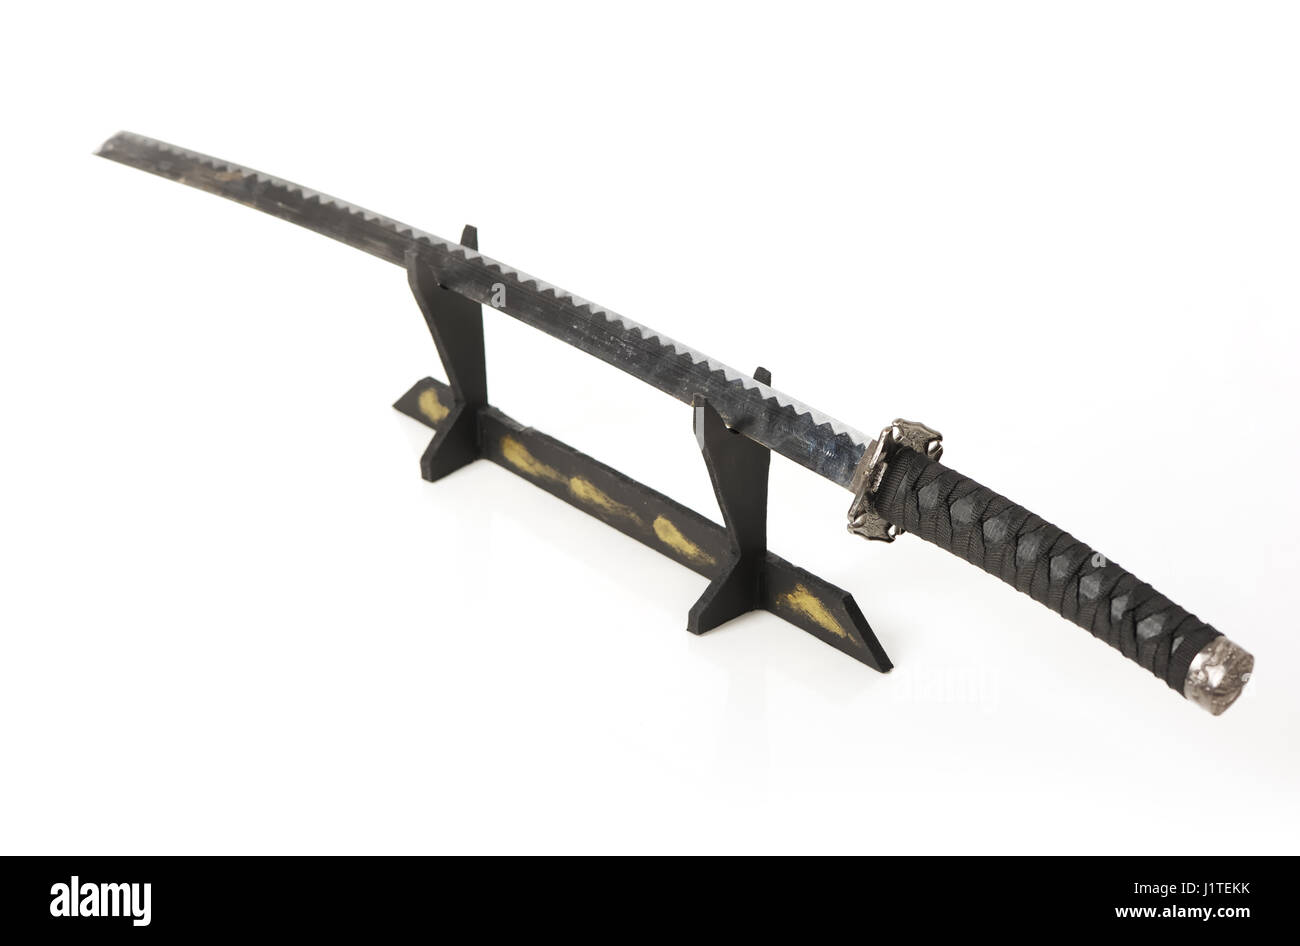 Samurai sword on a stand isolated Stock Photo - Alamy